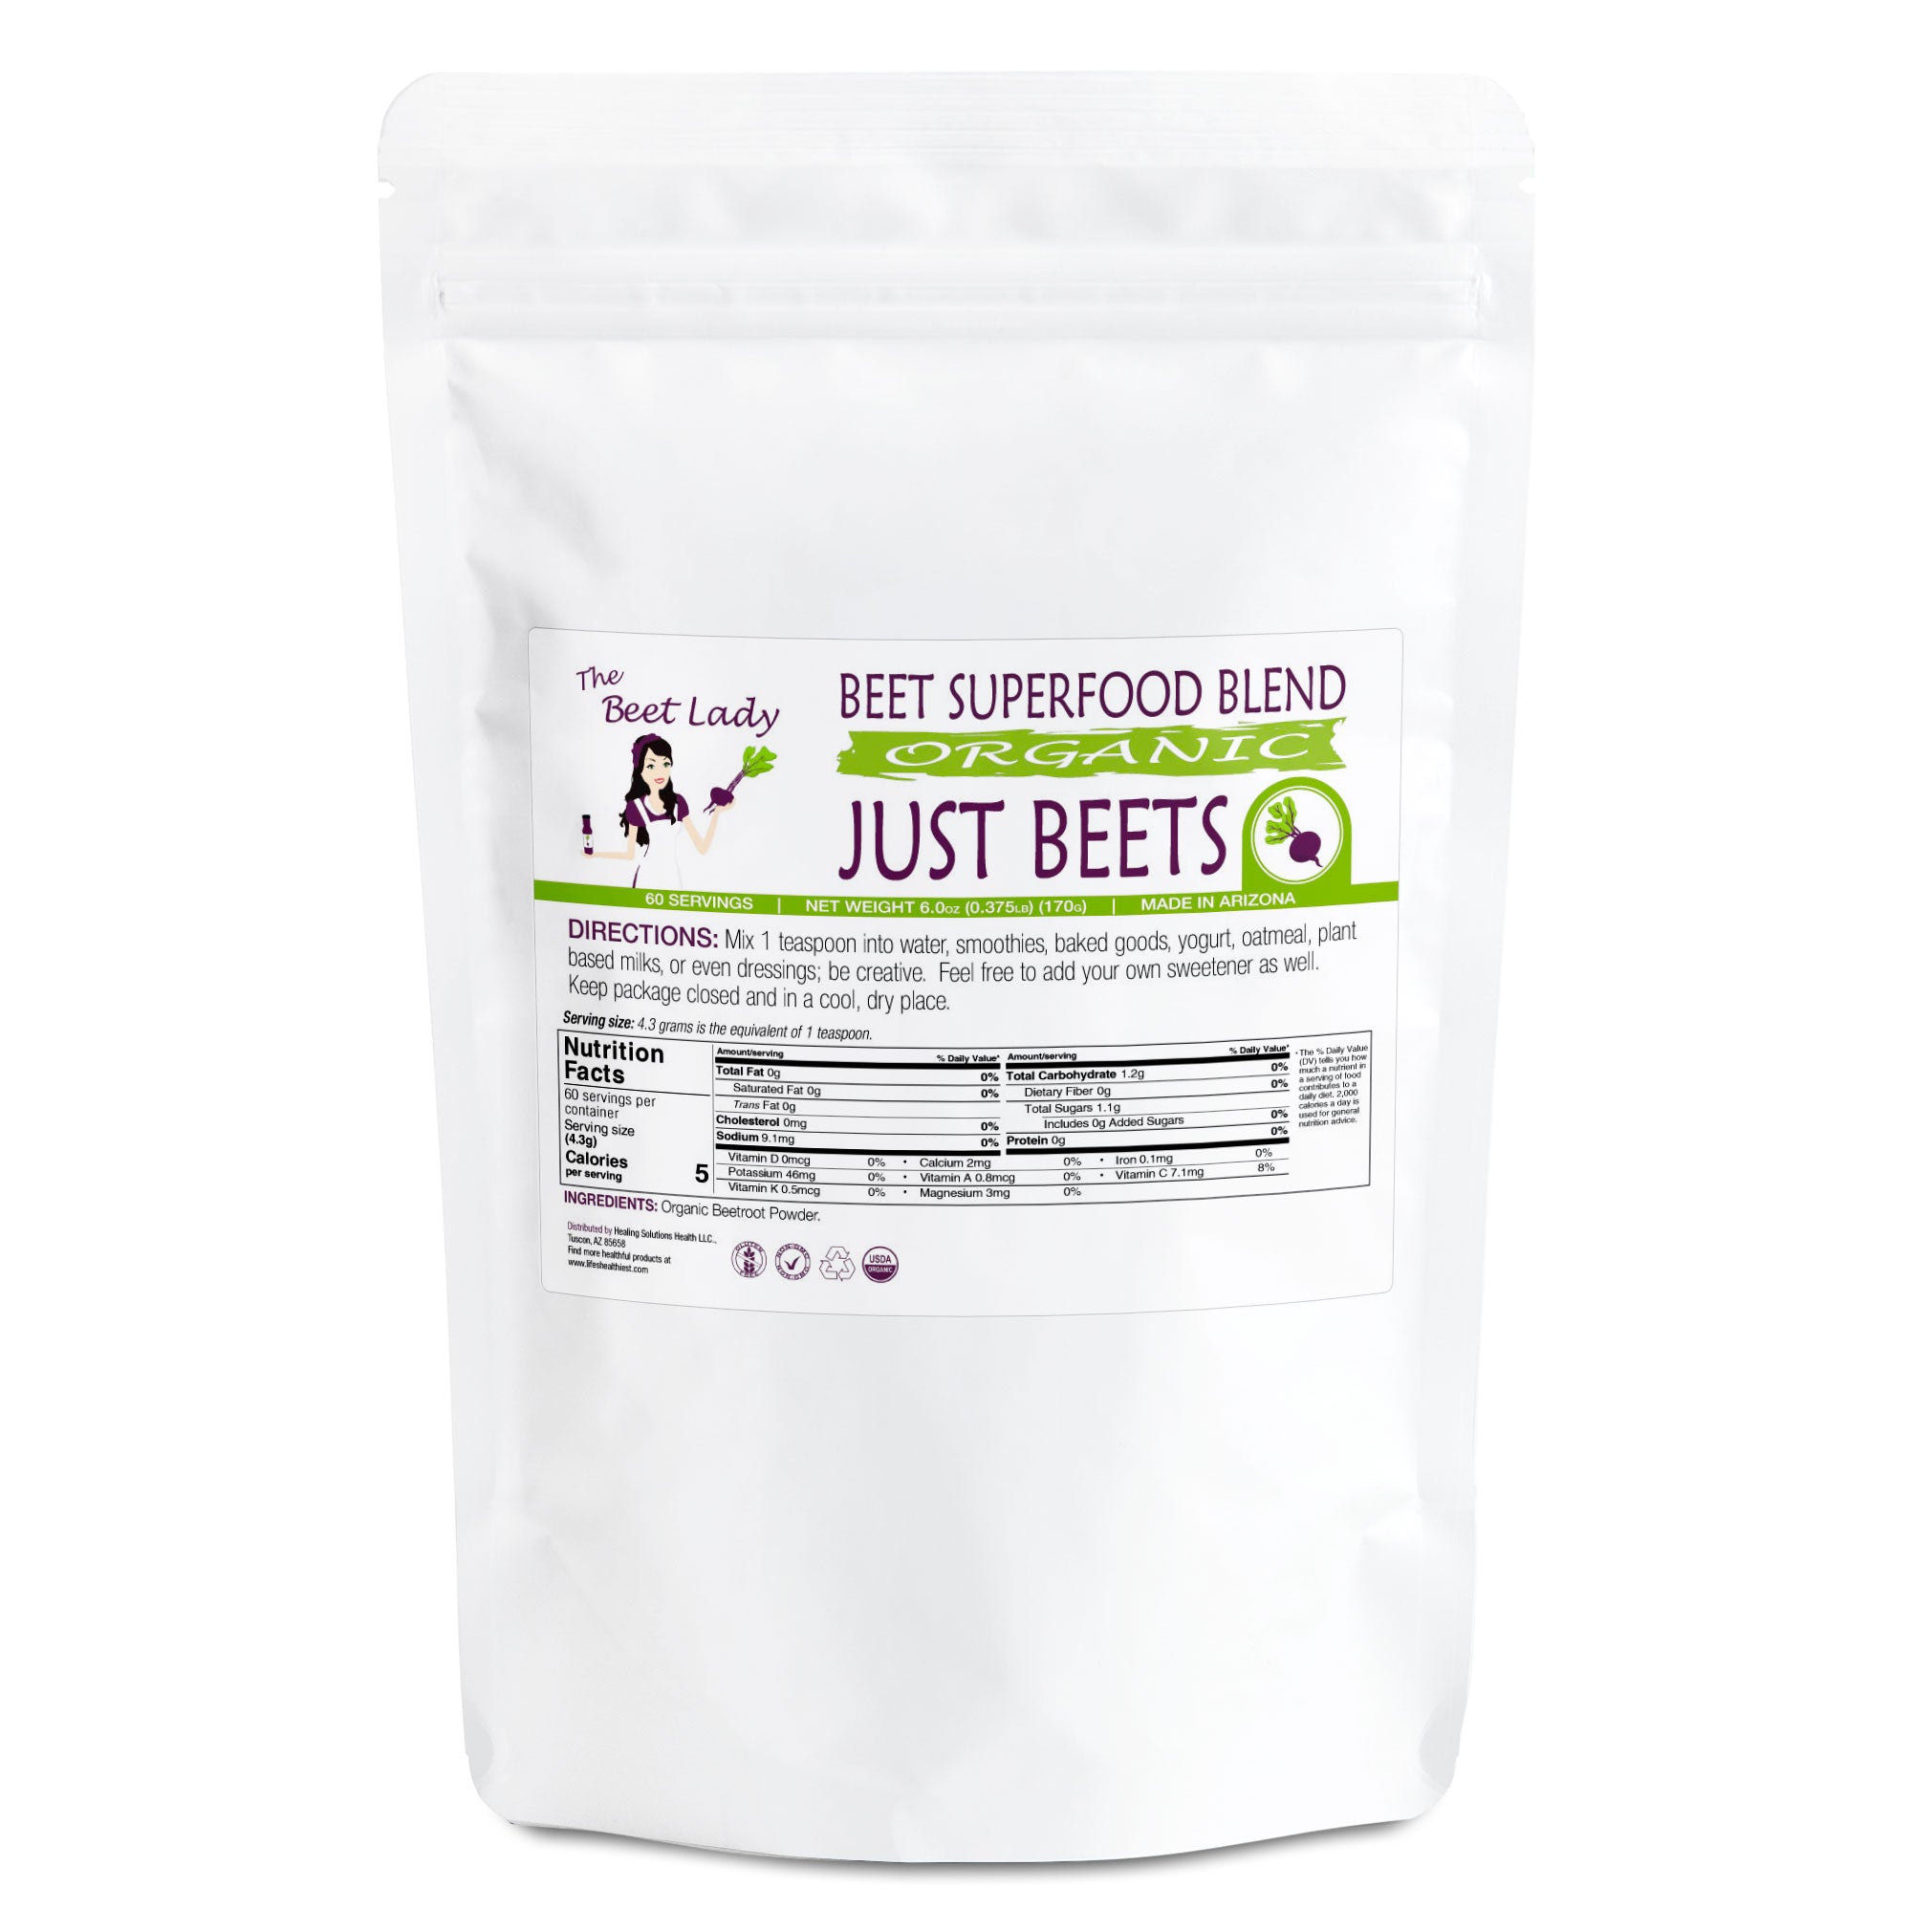 The Beet Lady JUST BEETS Beet SuperFood powder and capsules.  Organic, plant-based, non-GMO - 0